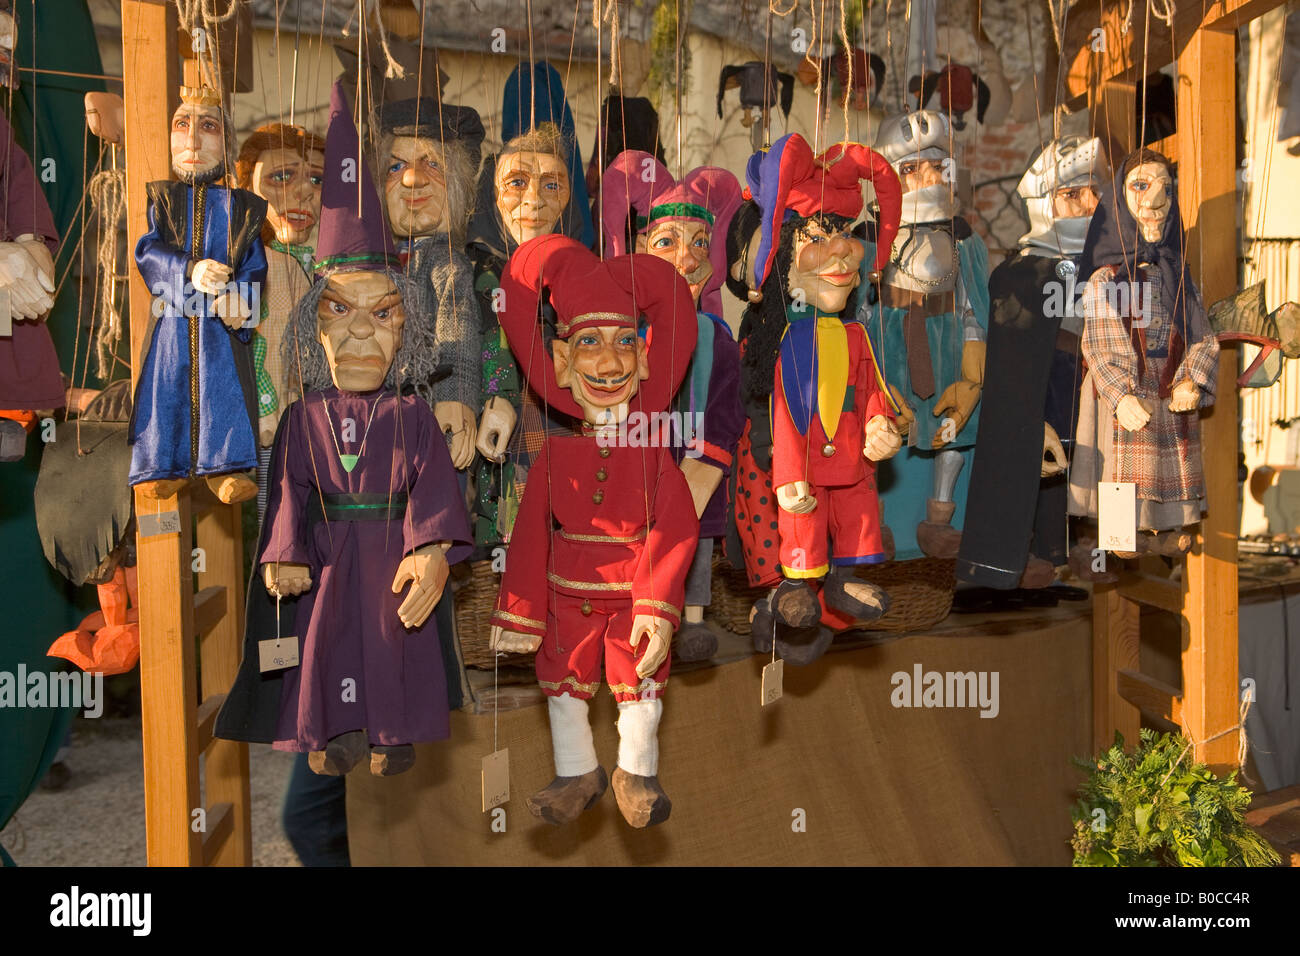 Handcrafted puppets for sale at the Christmas Markets at the Hexenagger Castle, Hexenagger, Bavaria, Germany, Europe. Stock Photo